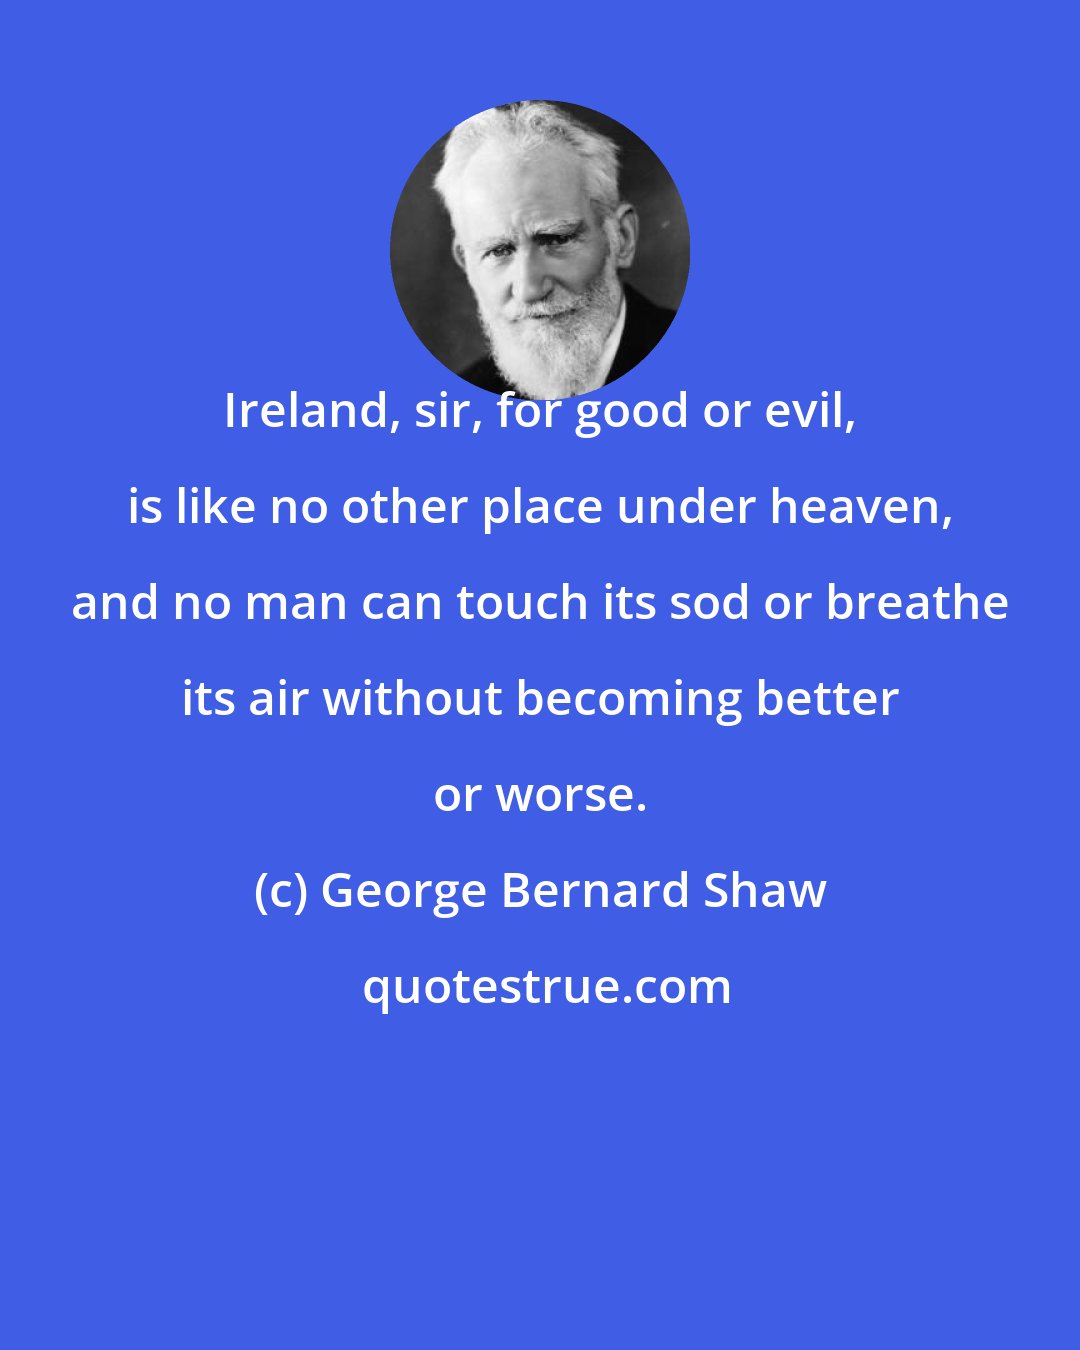 George Bernard Shaw: Ireland, sir, for good or evil, is like no other place under heaven, and no man can touch its sod or breathe its air without becoming better or worse.